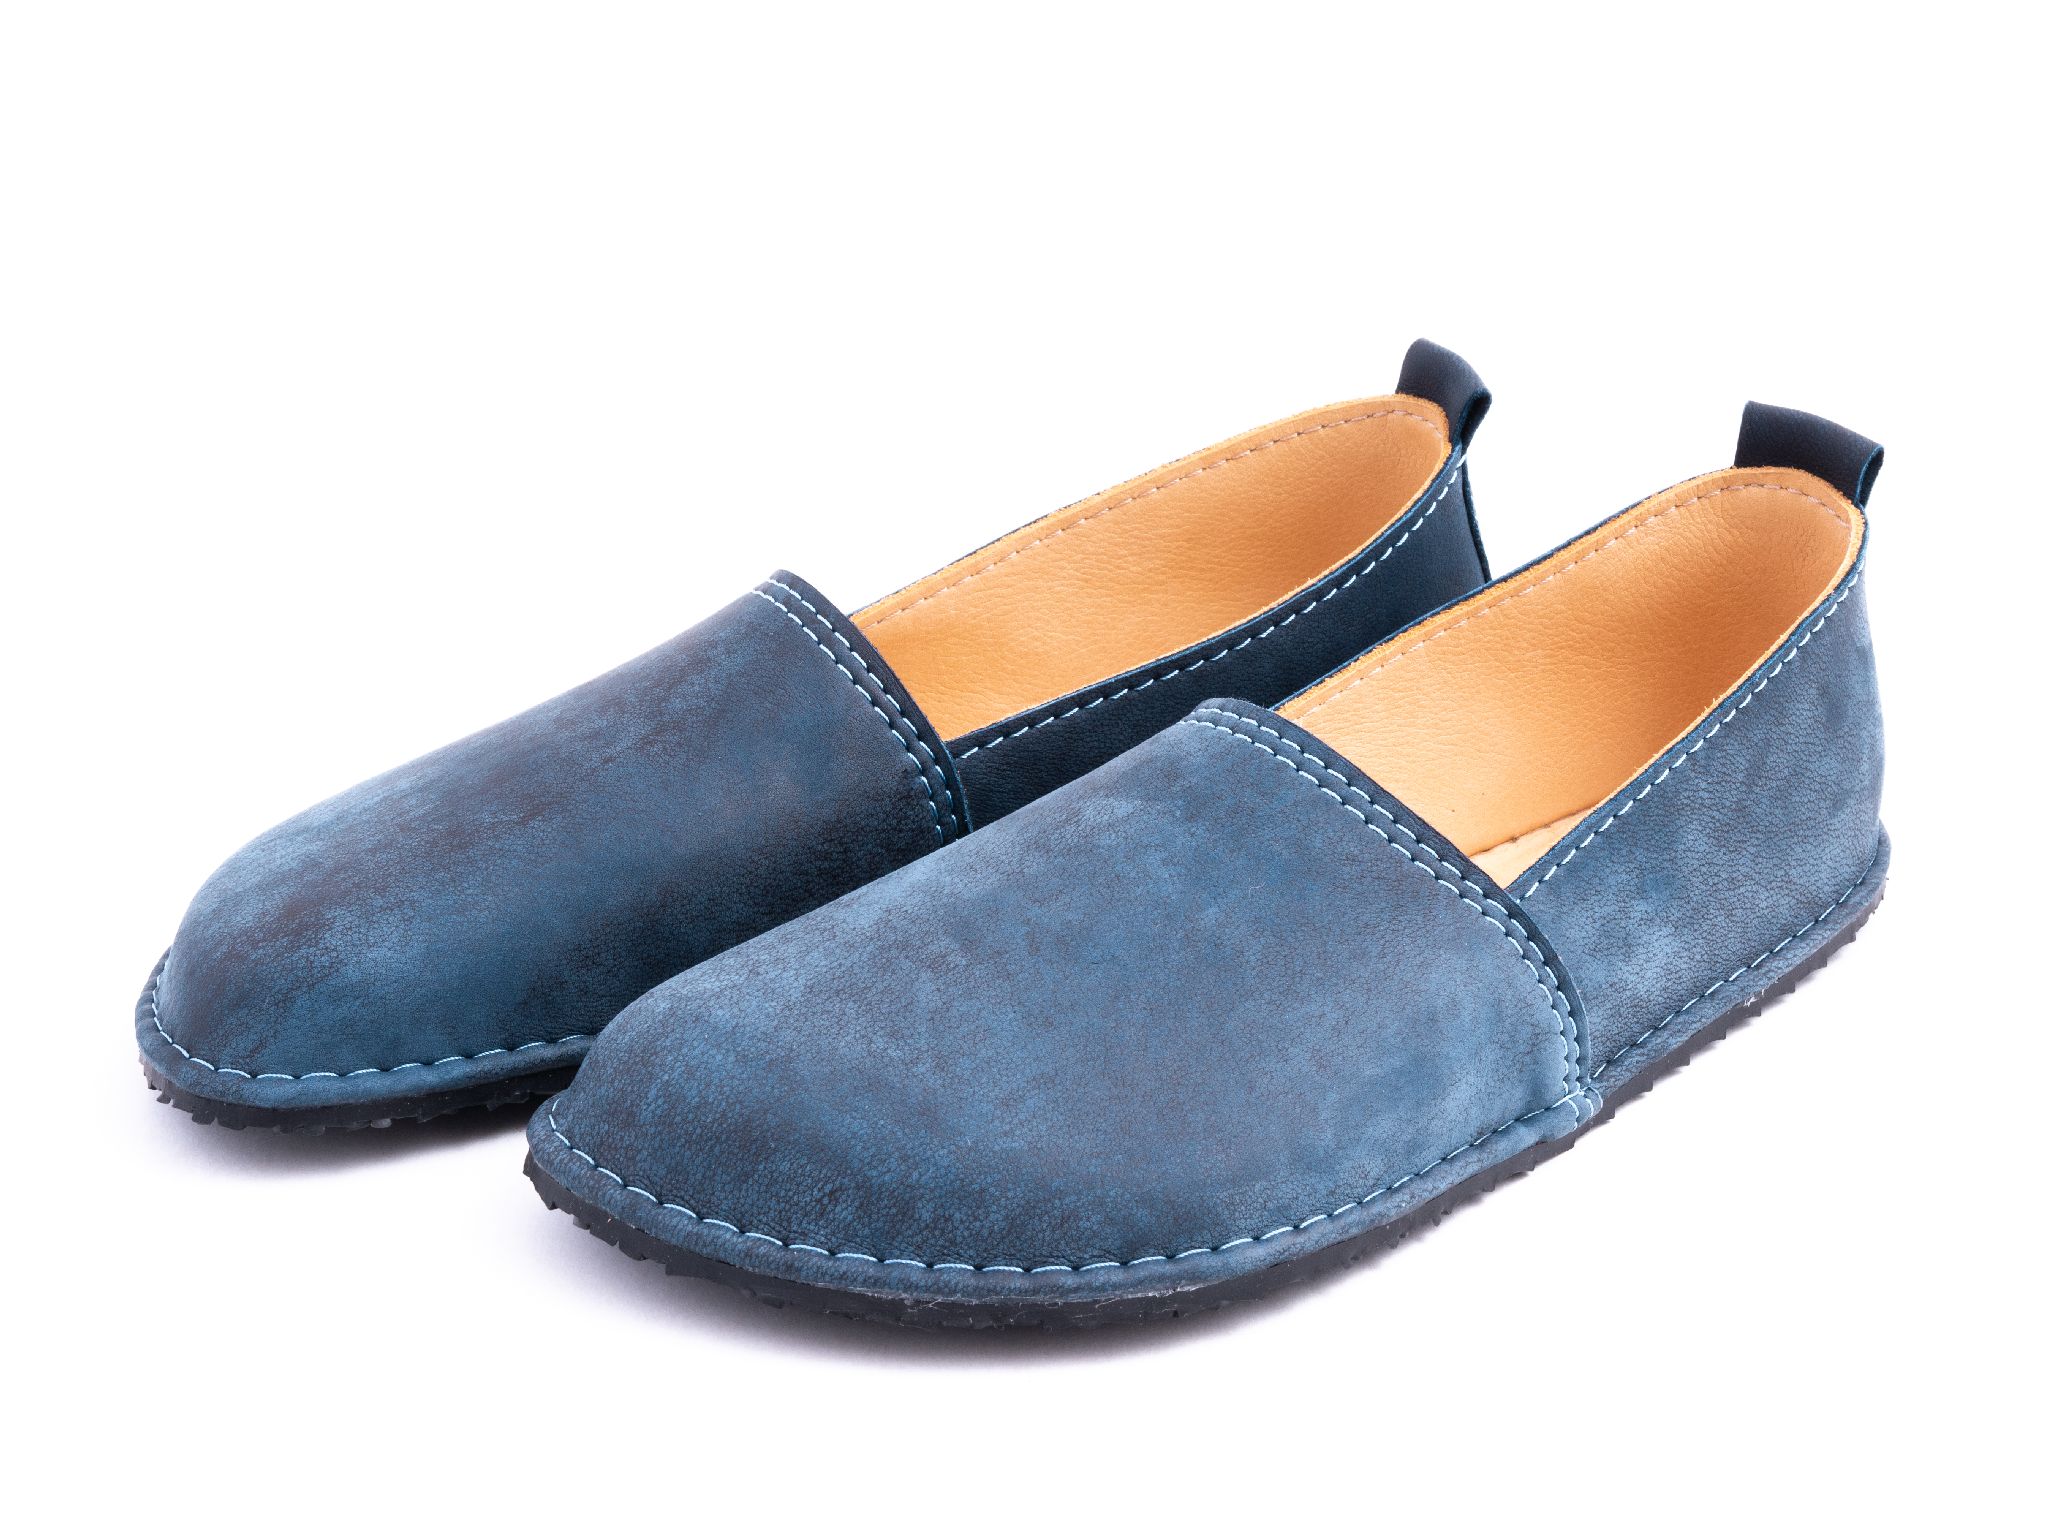 Fuego Barefoot moccasins - blue - Luks Shoes